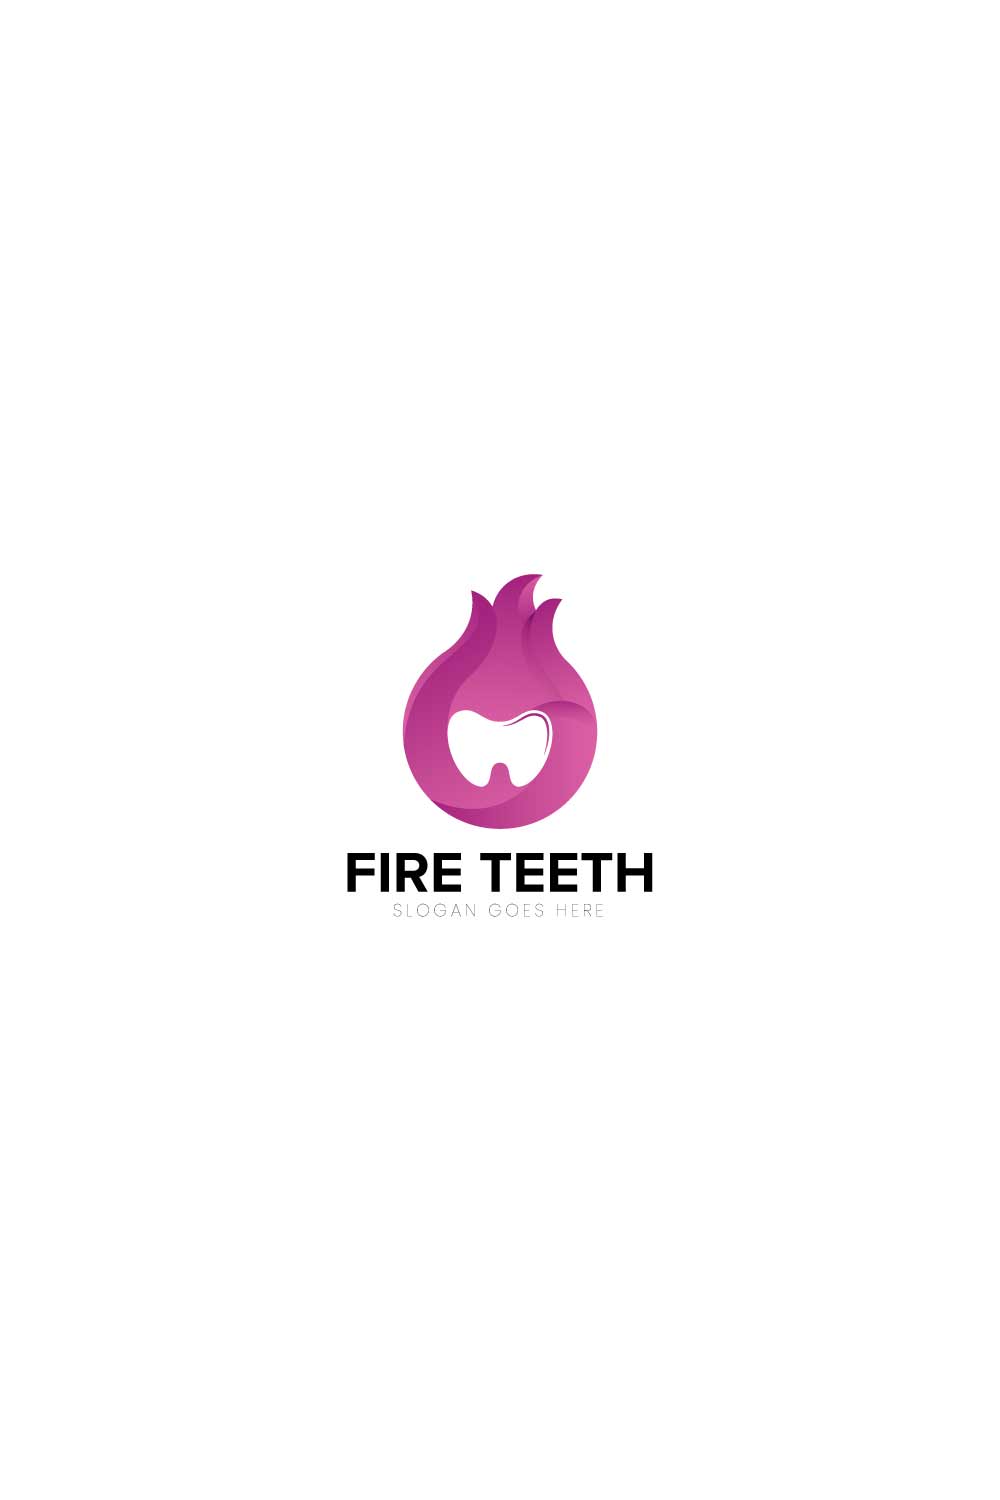 Dental with fire logo design pinterest preview image.